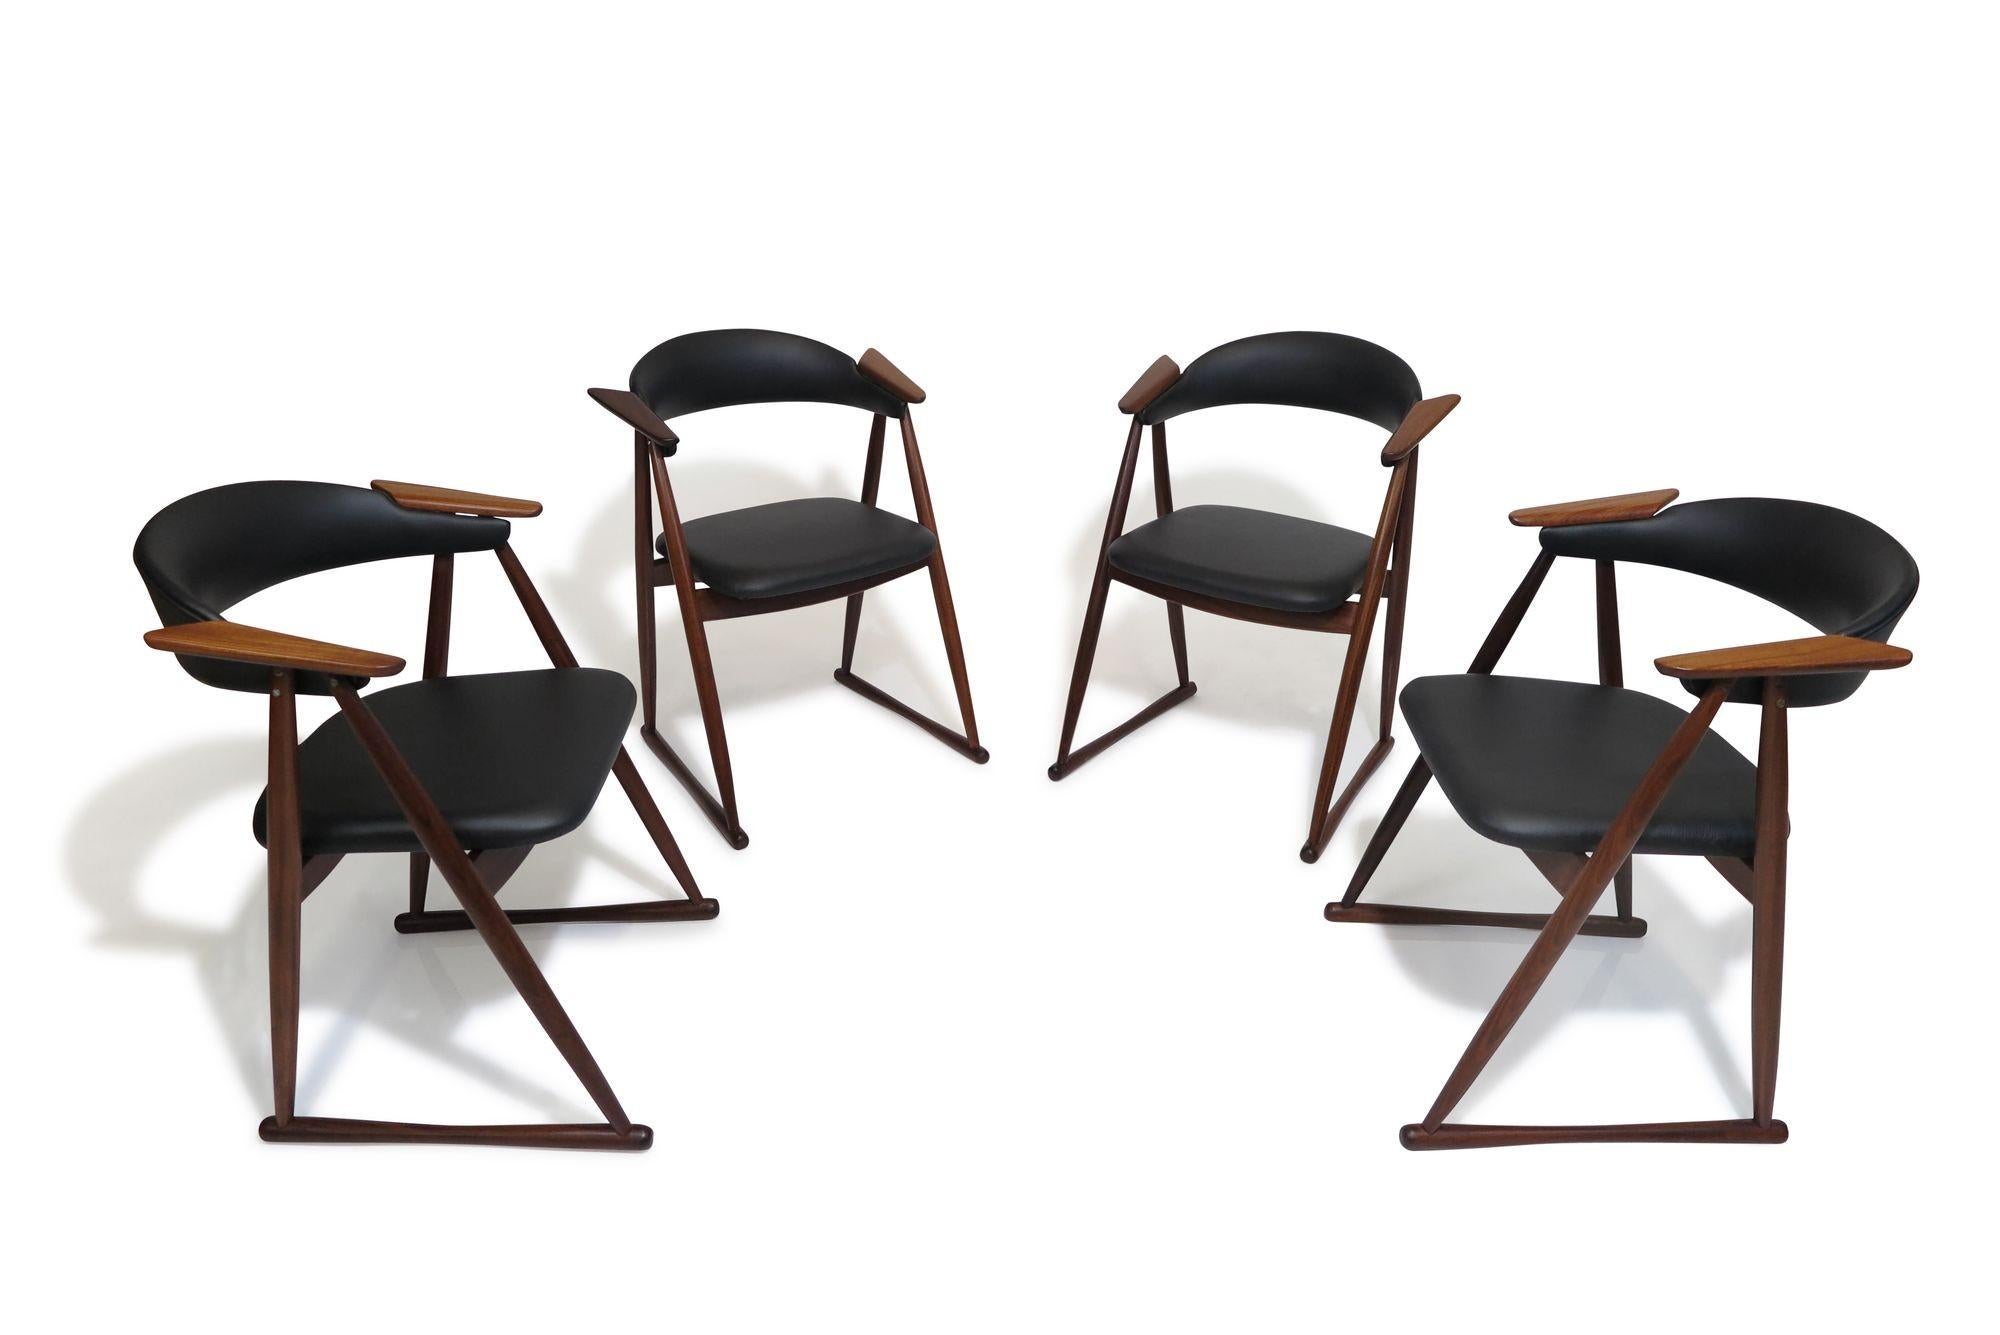 These rare teak dining chairs, crafted in Scandinavia during the late 1960s, feature solid teak frames with upholstered seats, curved backs, and distinctive floating wood arms. Recently professionally restored and upholstered in new black leather,